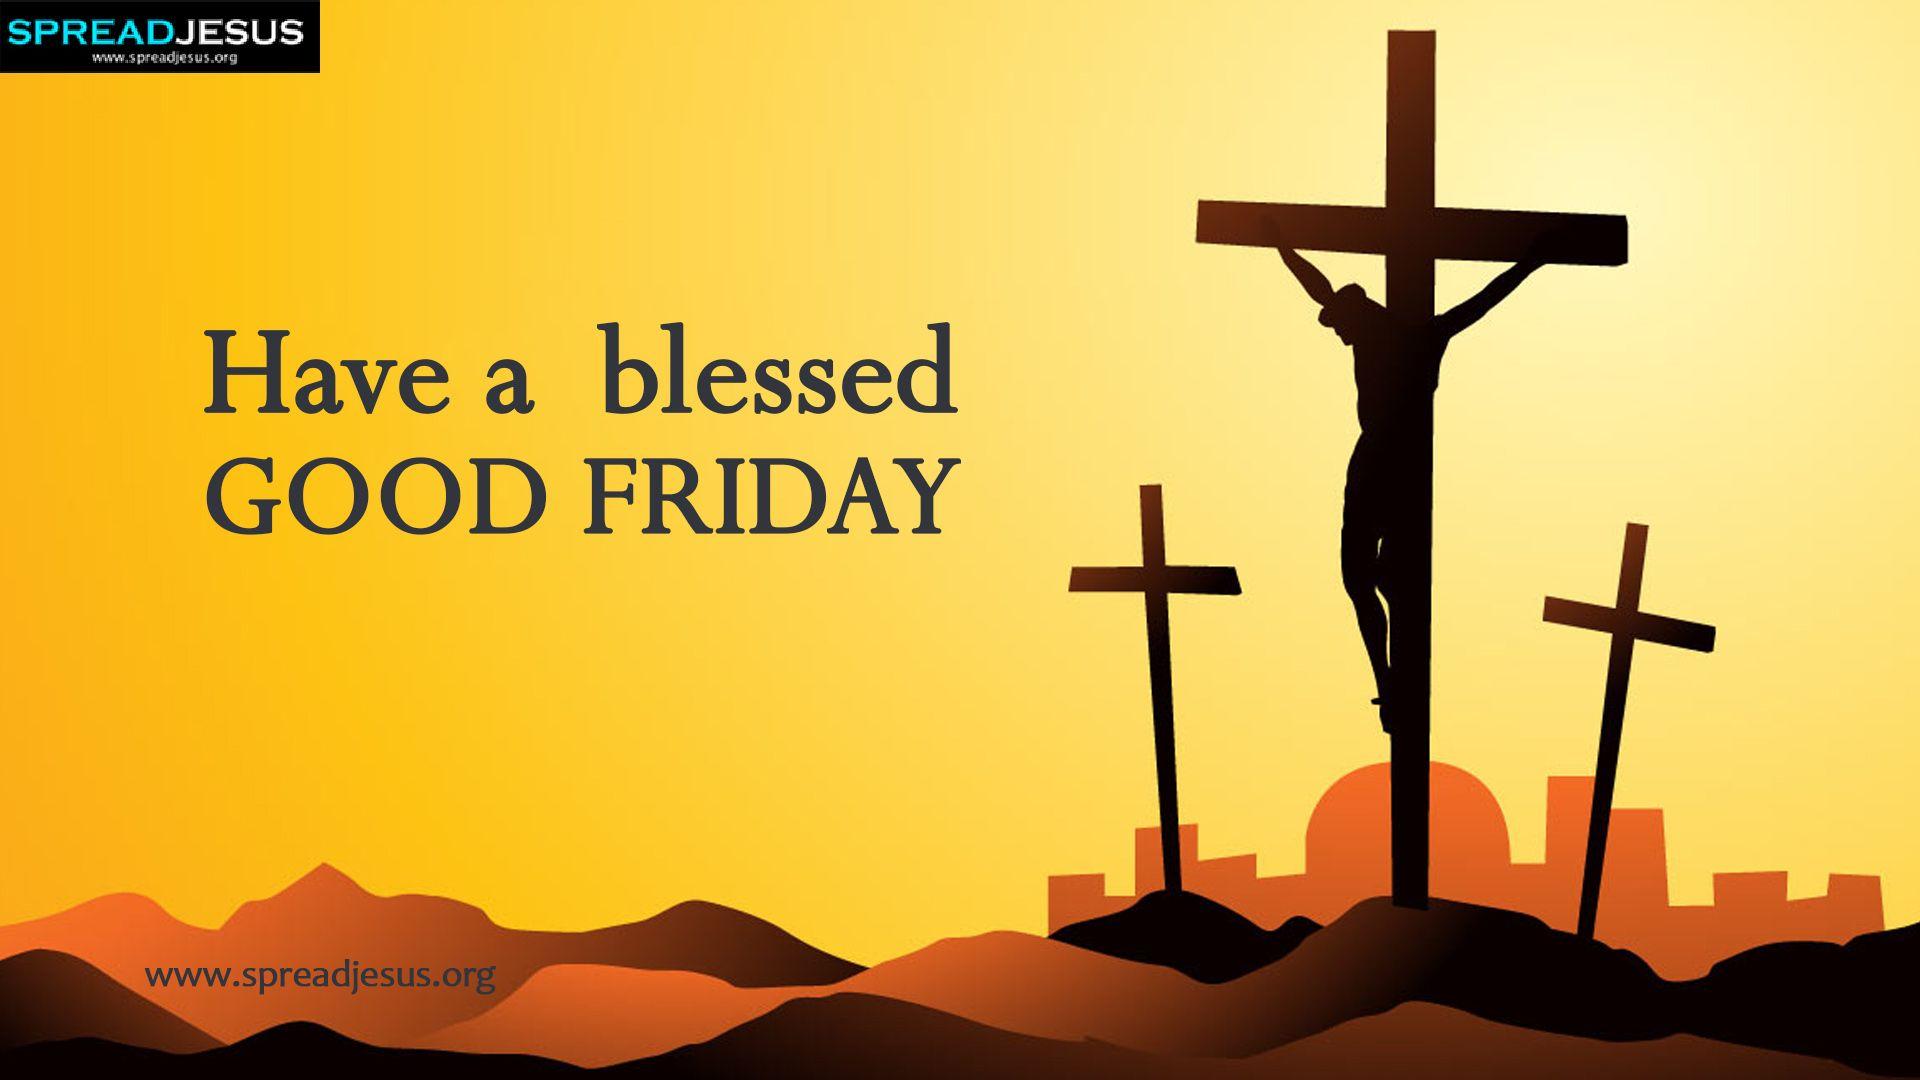 Friday HD Wallpaper Have a blessed Good Friday